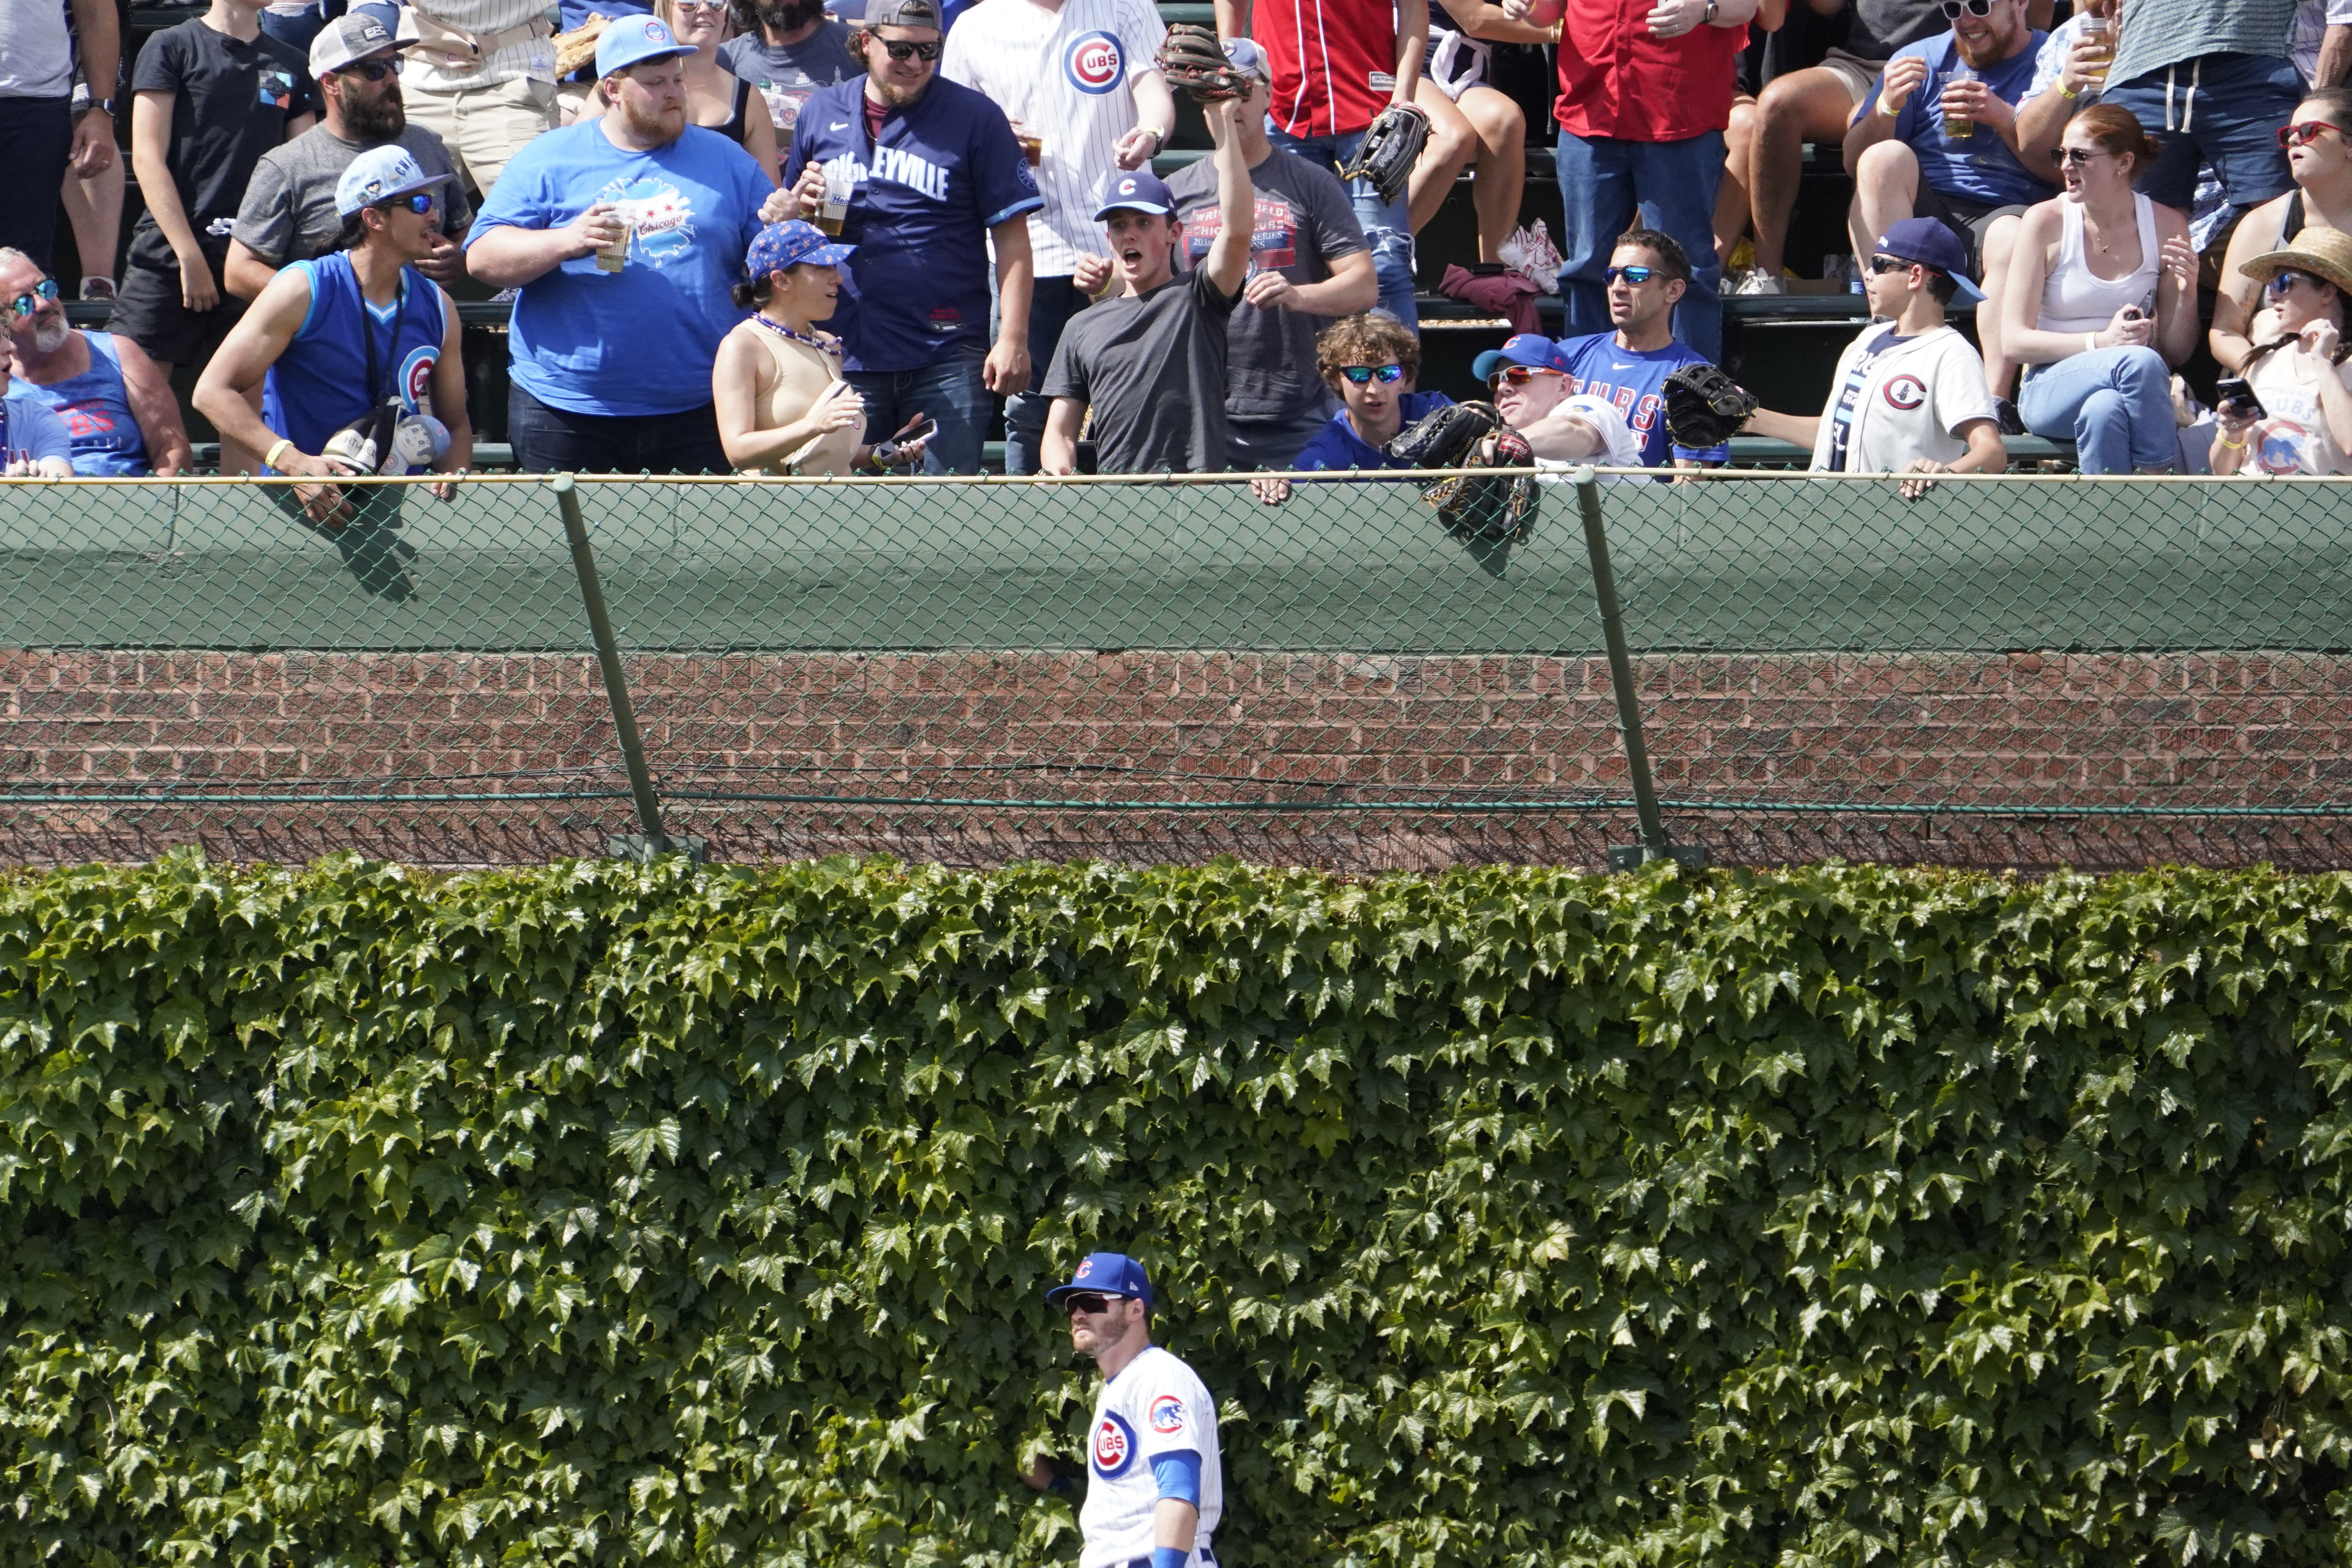 Local Cubs, Reds superfans' excitement amps up ahead of Field of